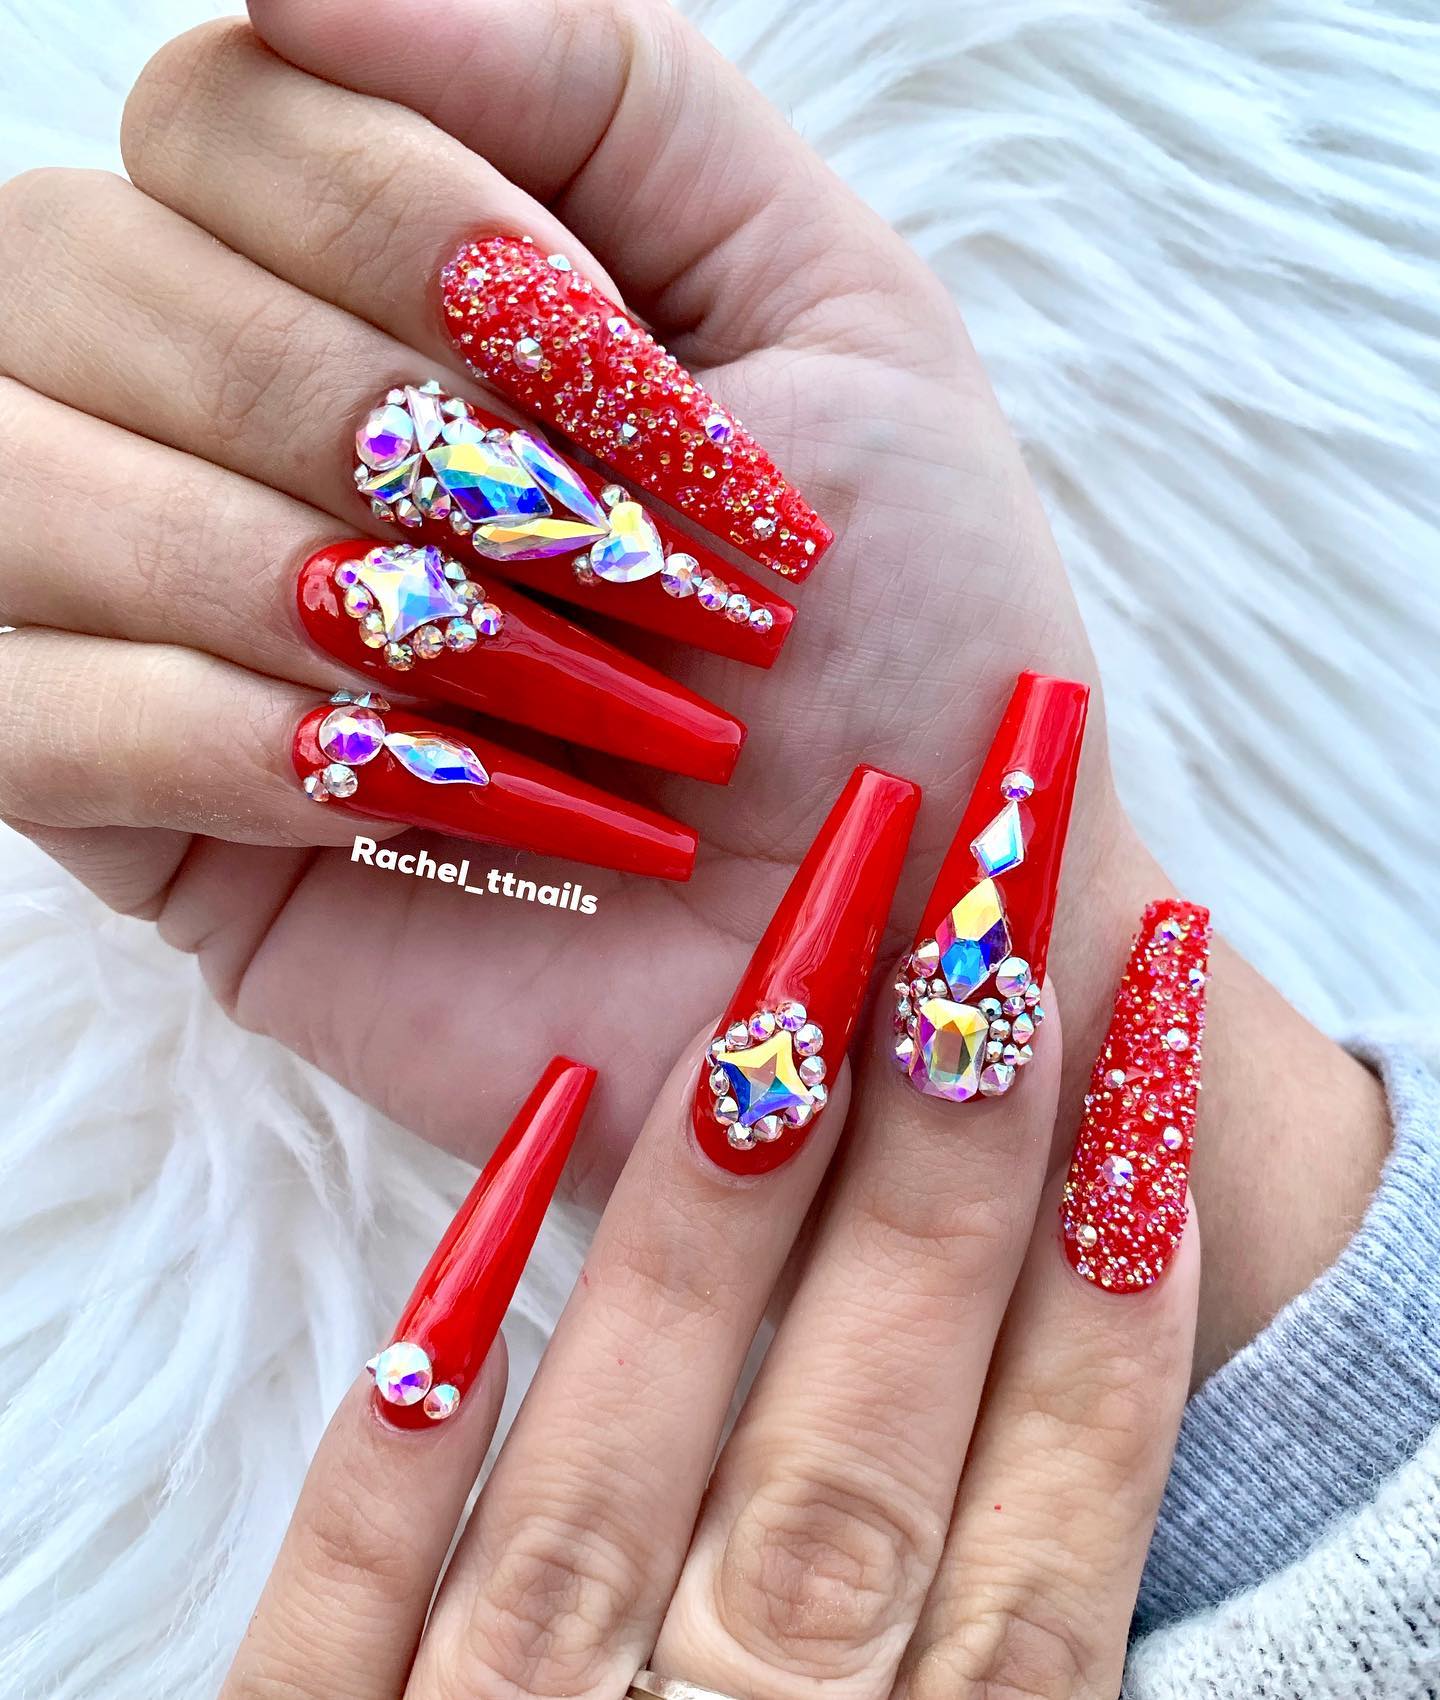 Bling Red Coffin Nails With Rhinestones